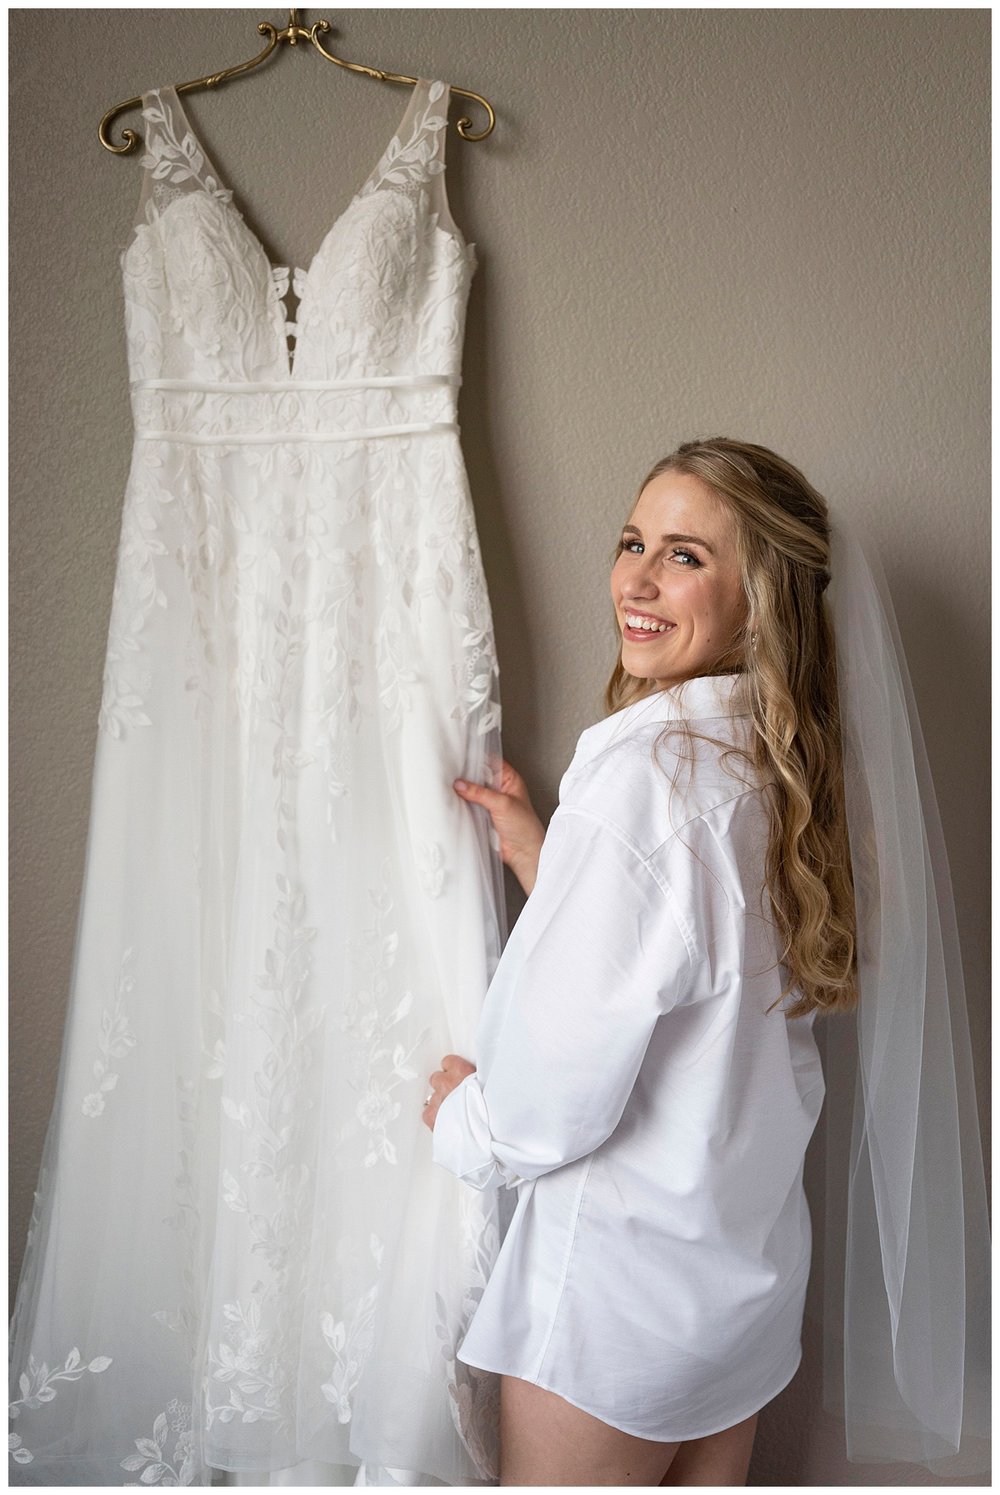 bride getting ready with earrings and holding wedding gown